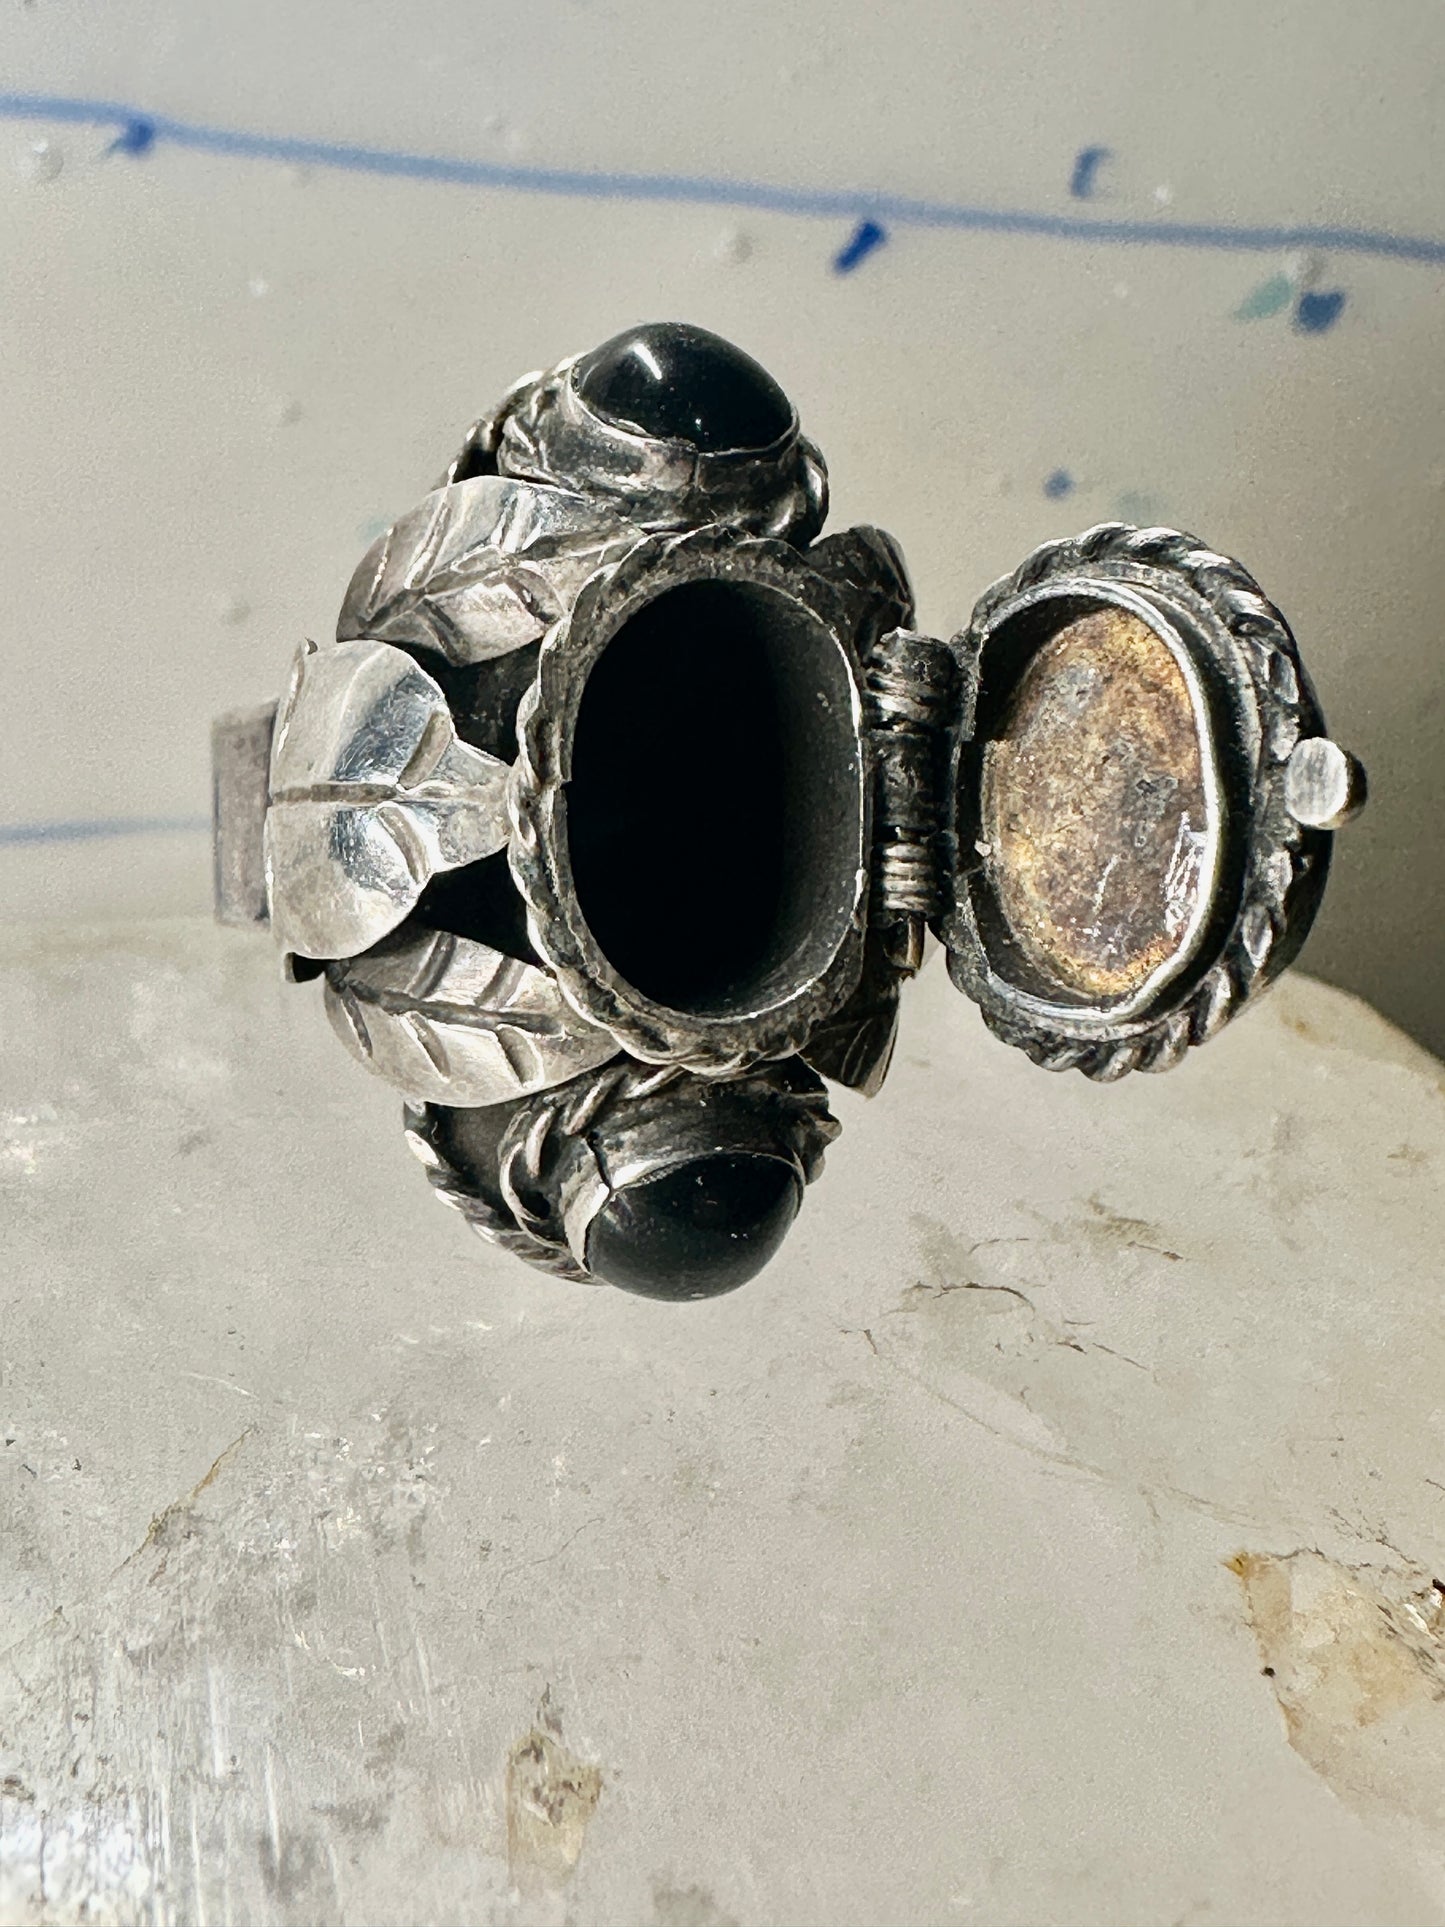 Poison ring onyx size 7 Mexico sterling silver women